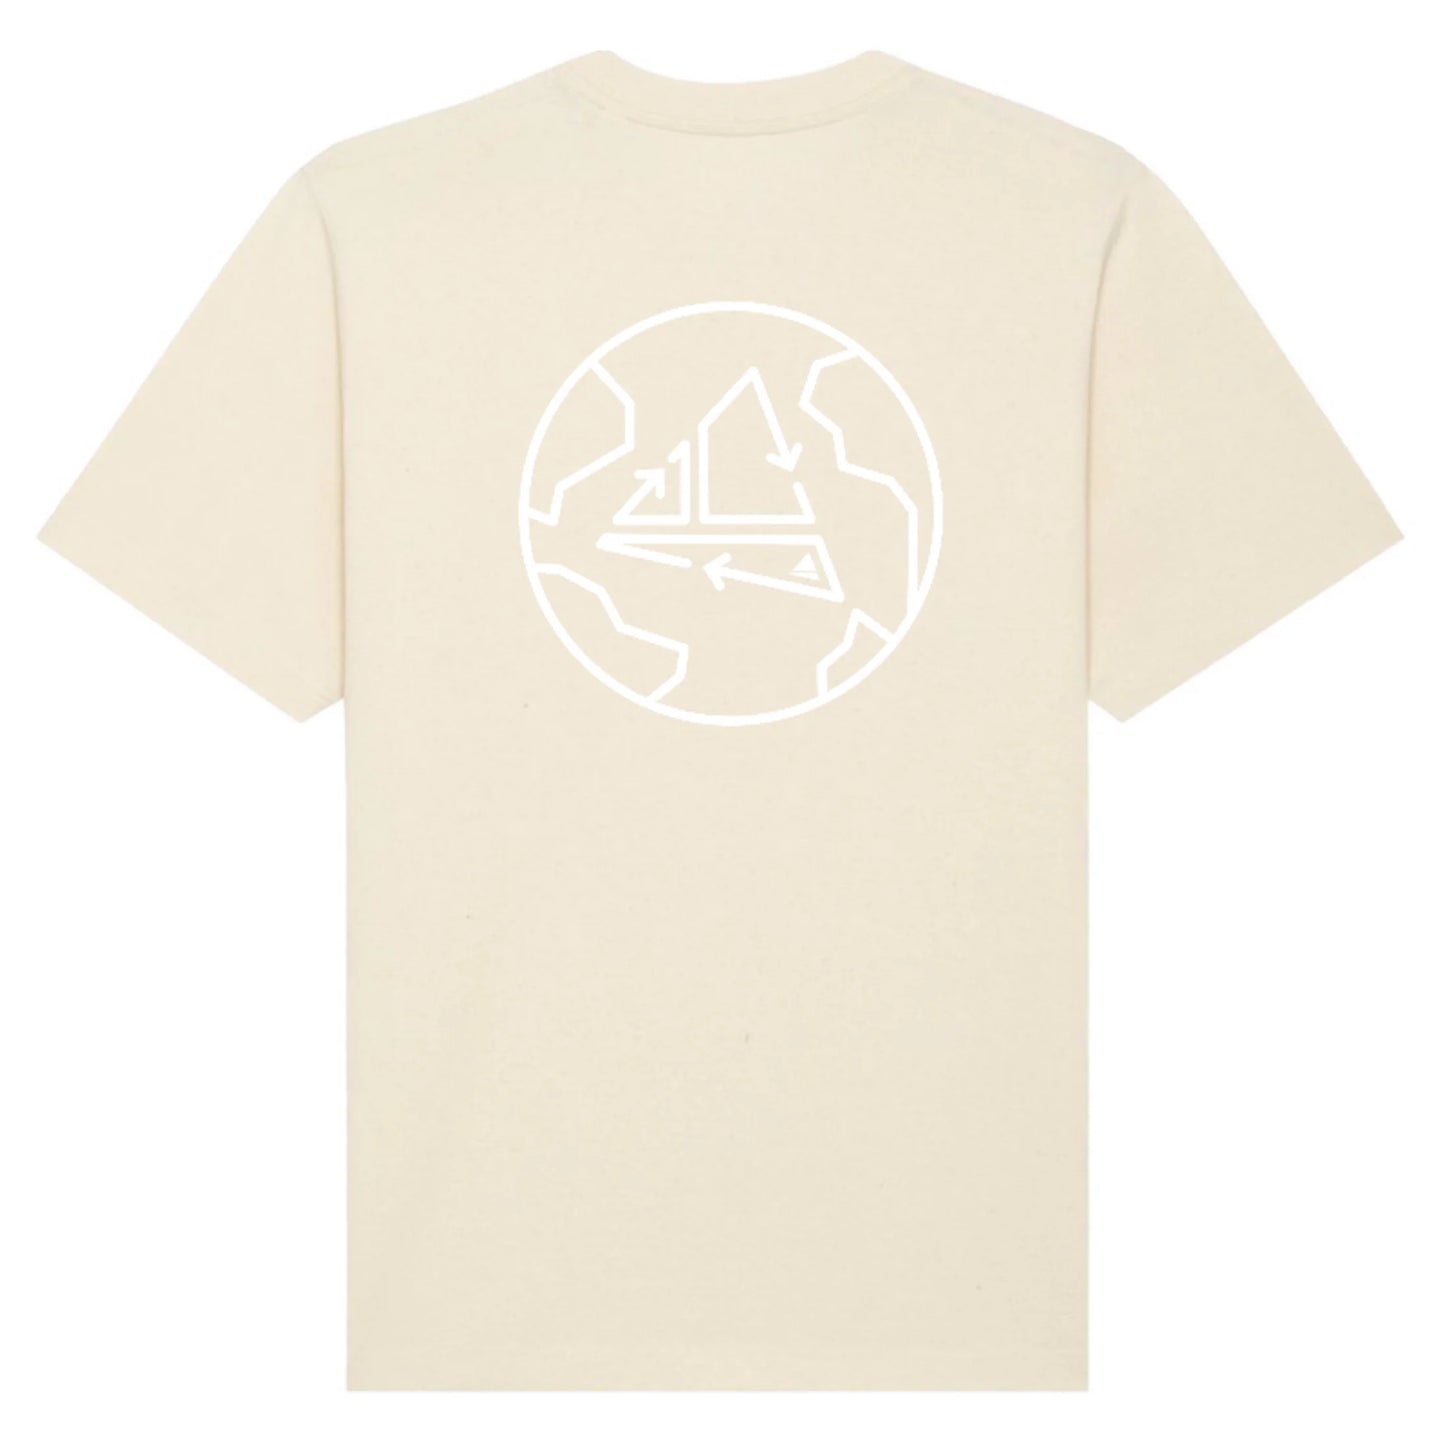 Boat Cove Global Sailing Sustainable T-shirt